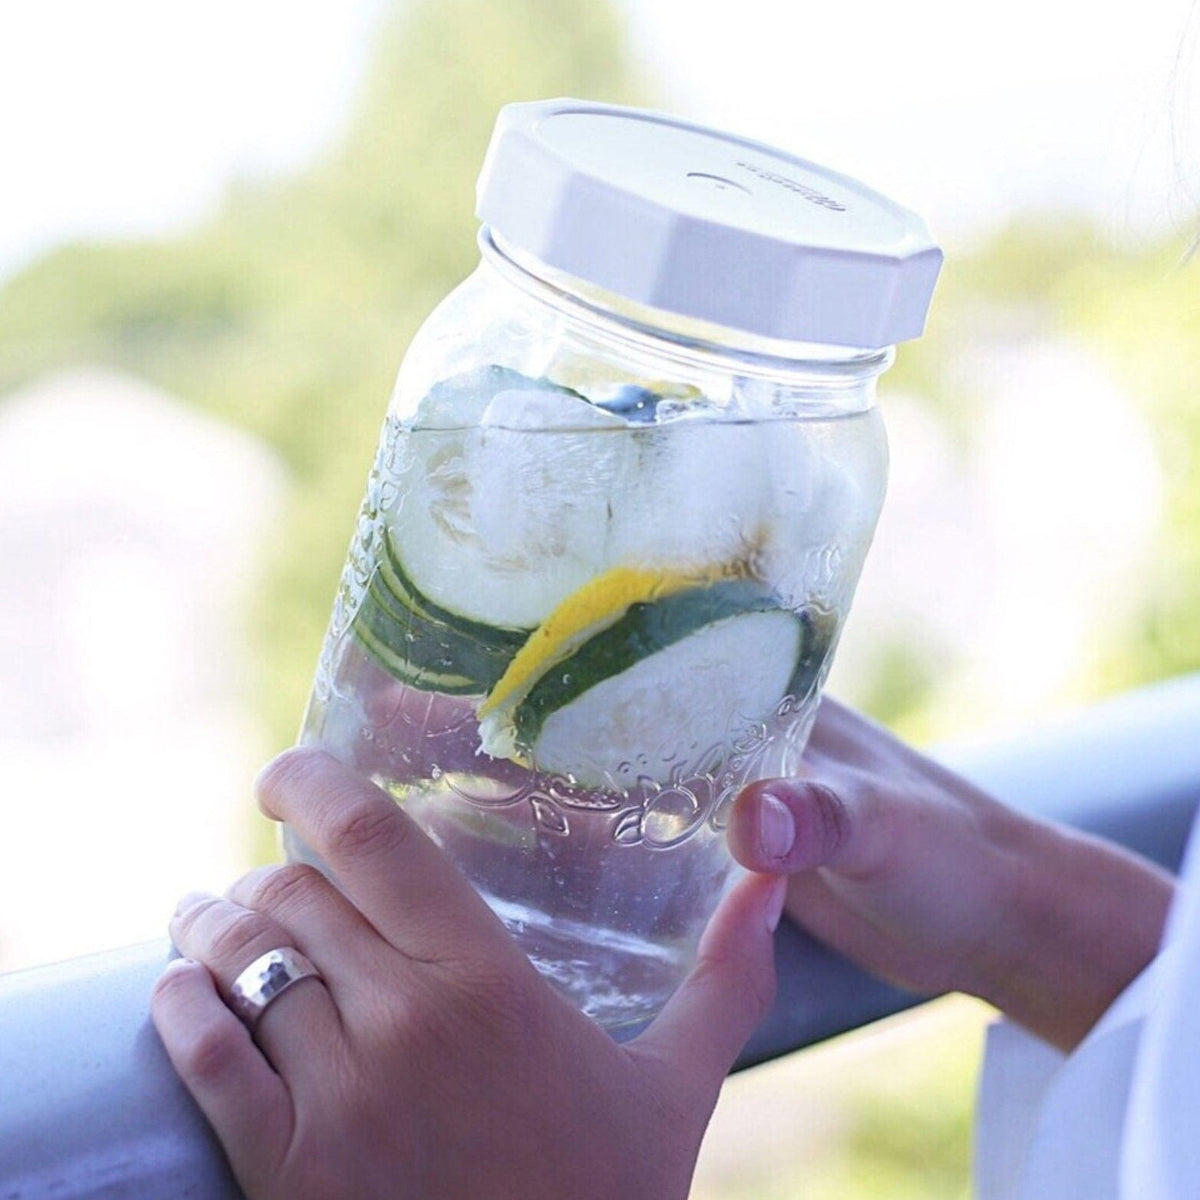 Woman is outdoors holding a quart size mason jar with lemon cucumber water in it with a white MasonTops tough top on the jar.